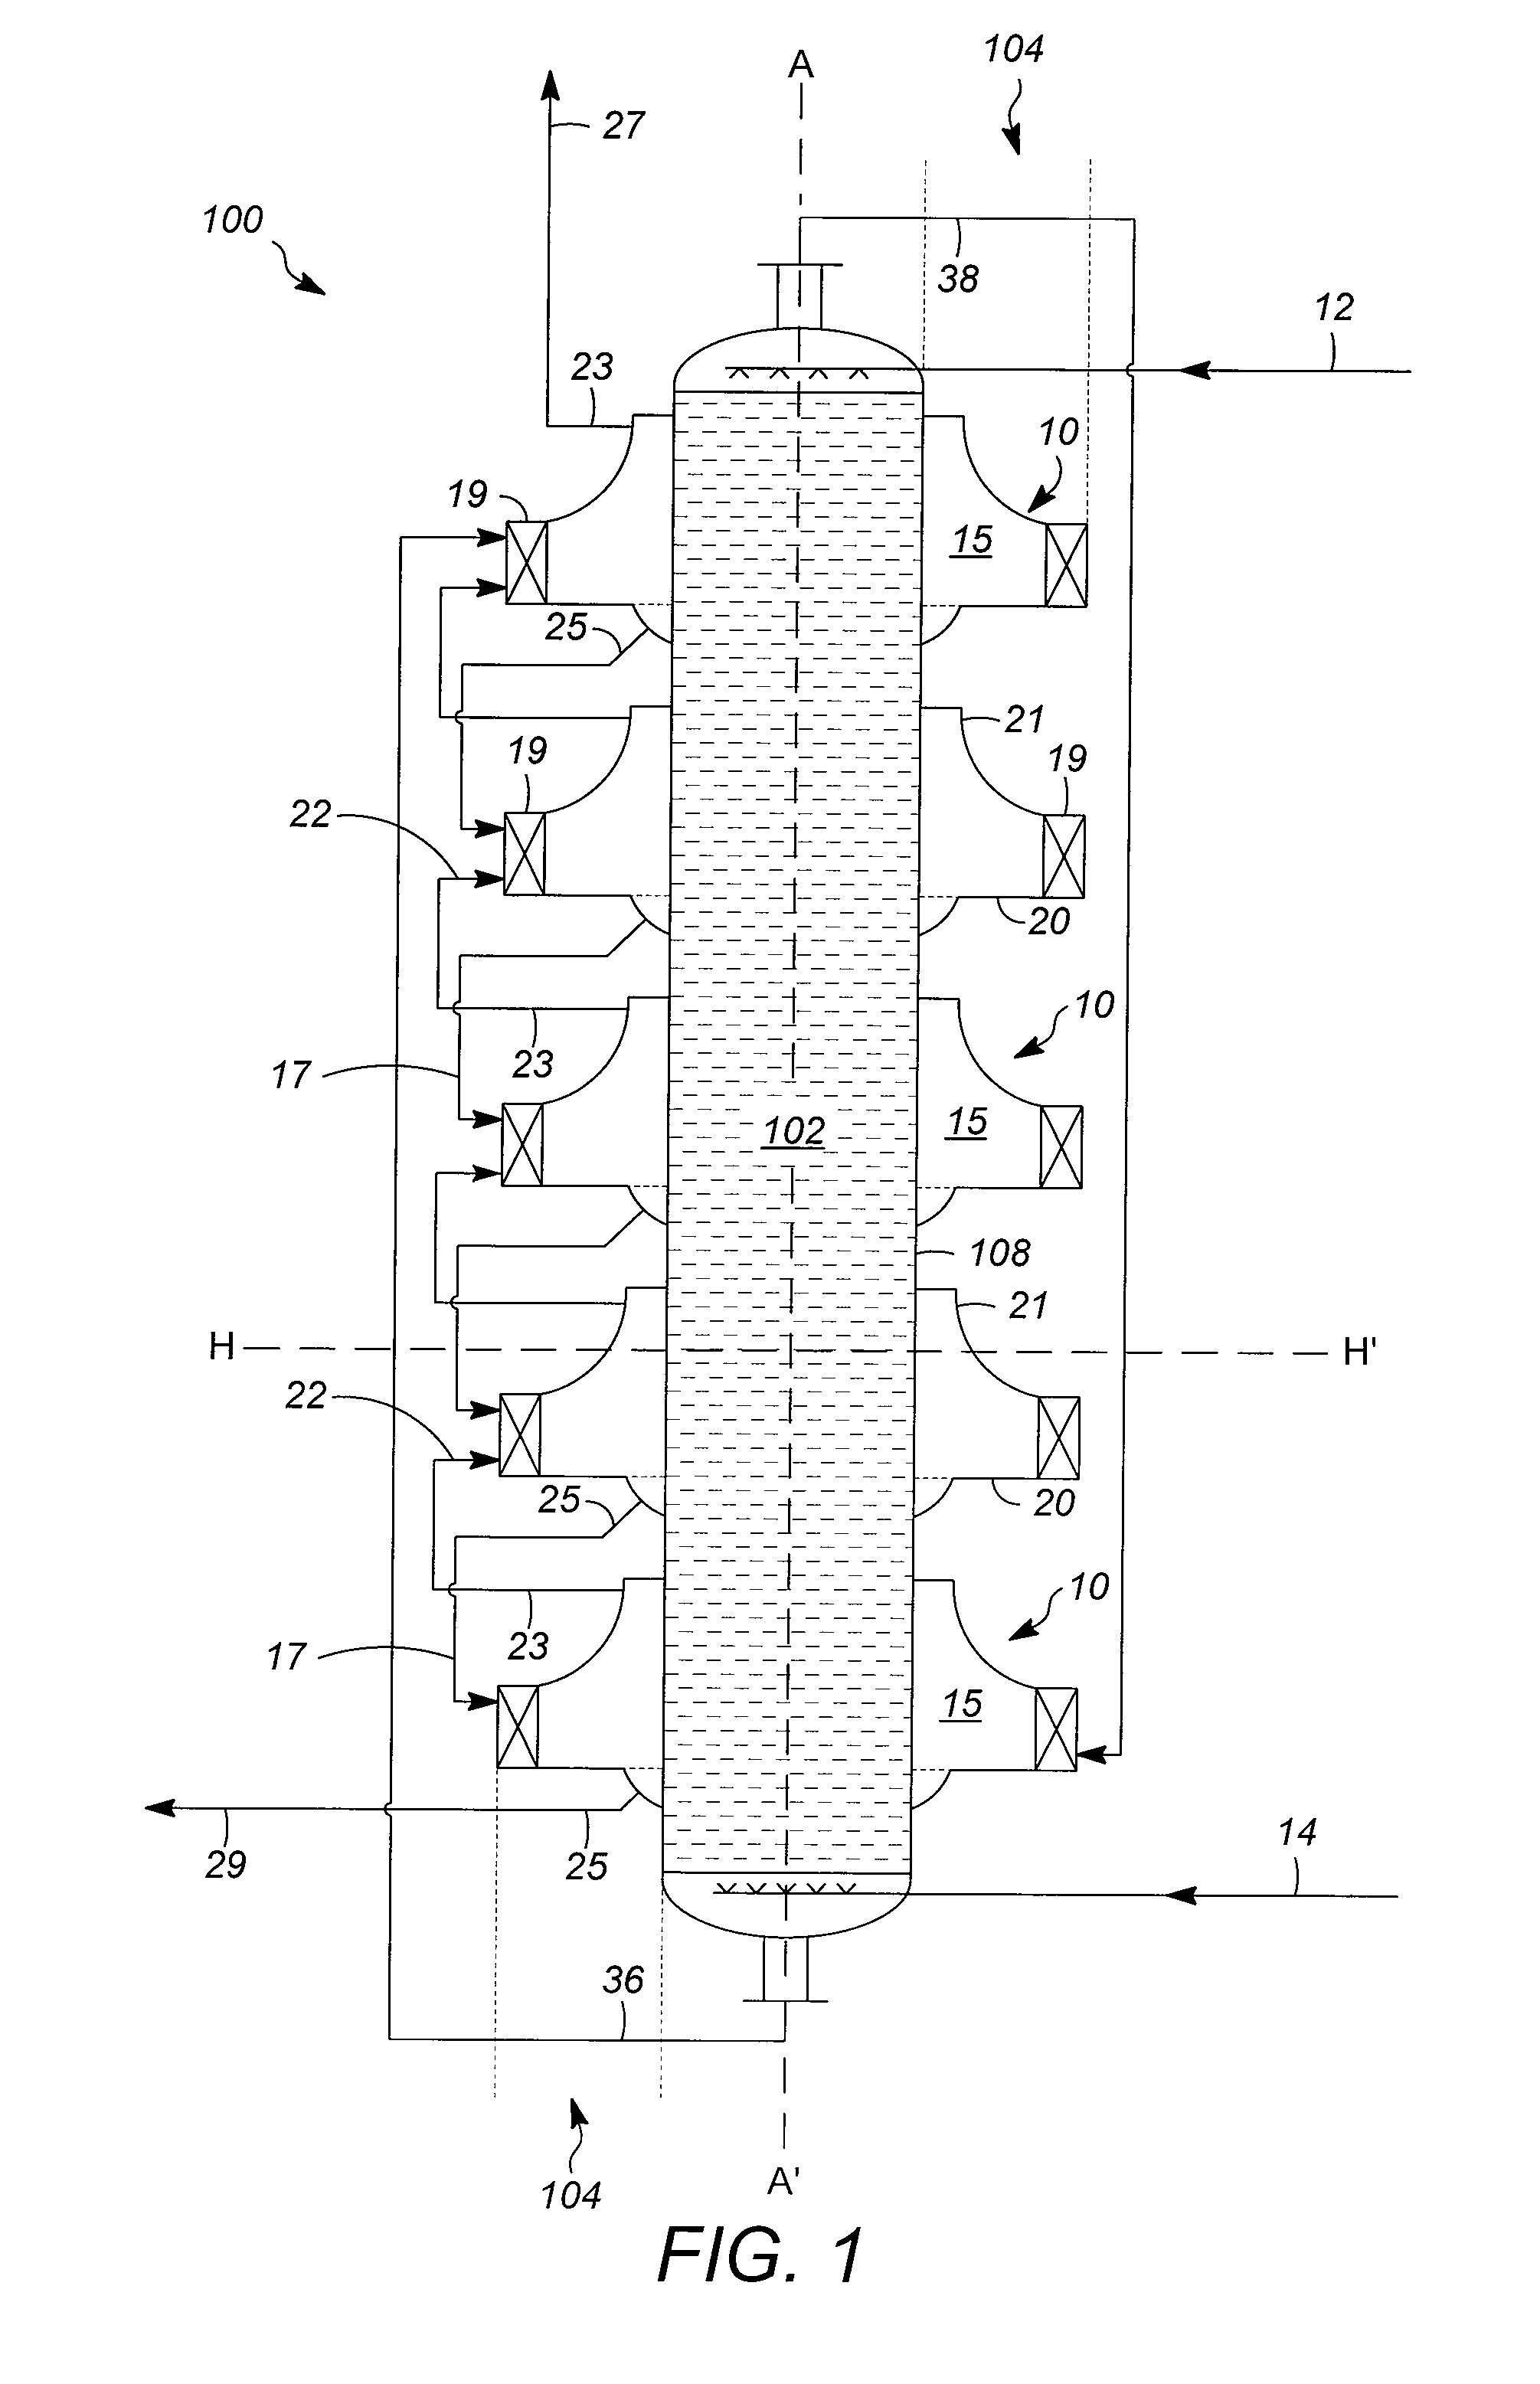 Vapor-Liquid Contacting Apparatuses Having a Secondary Absorption Zone with Vortex Contacting Stages